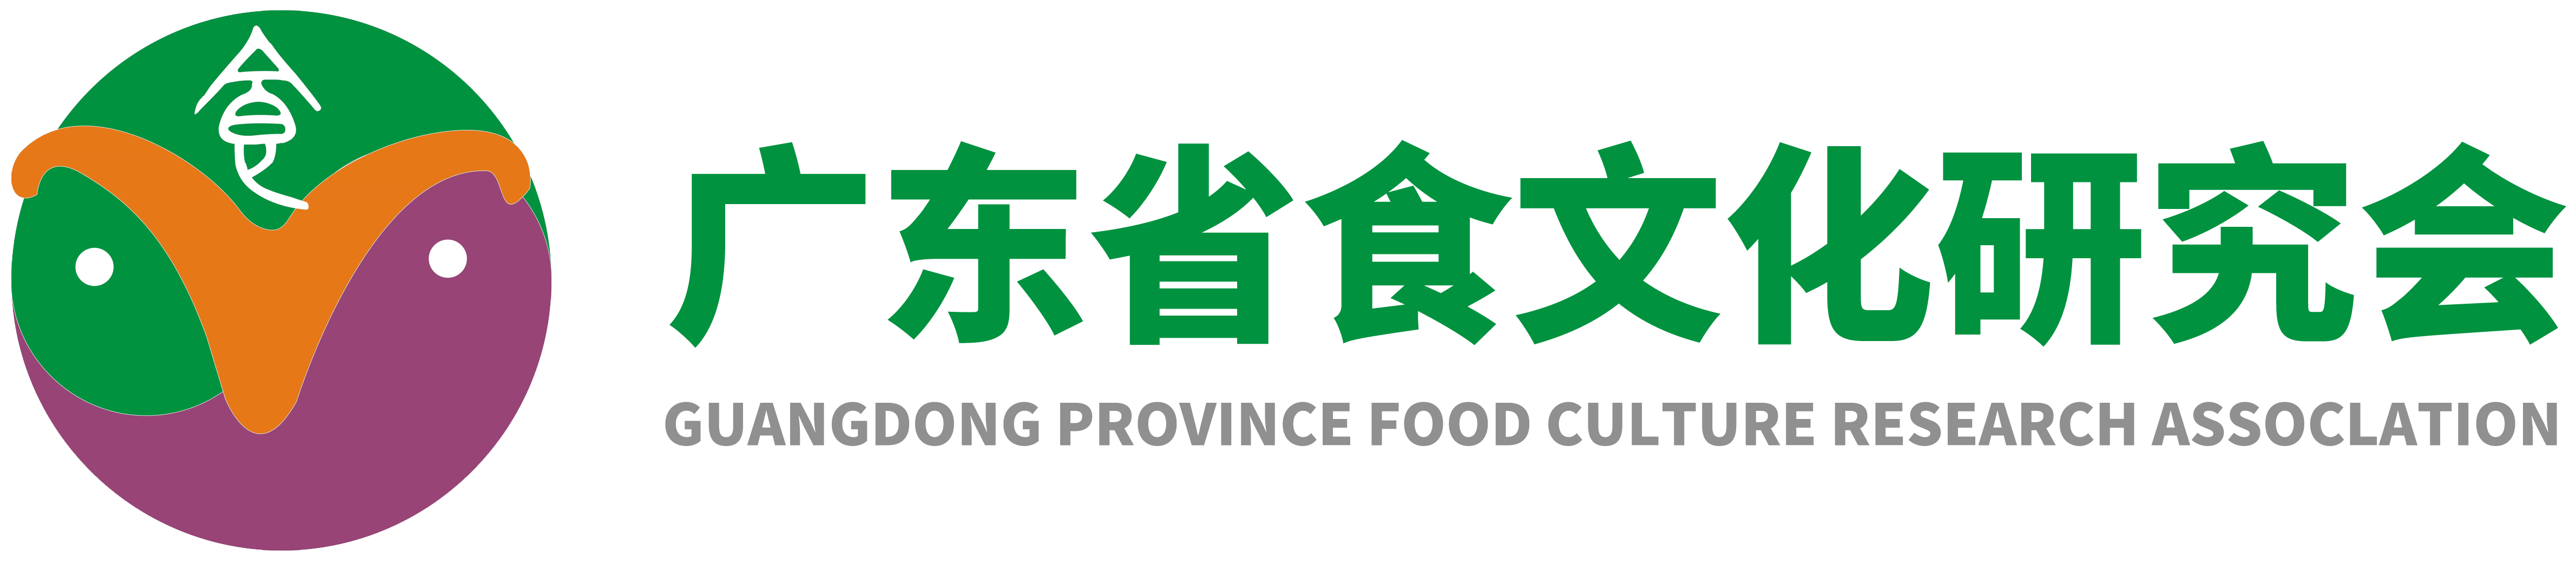 GUANGDONG PROVINCE FOOD CULTURE RESEARCH ASSOCLATION